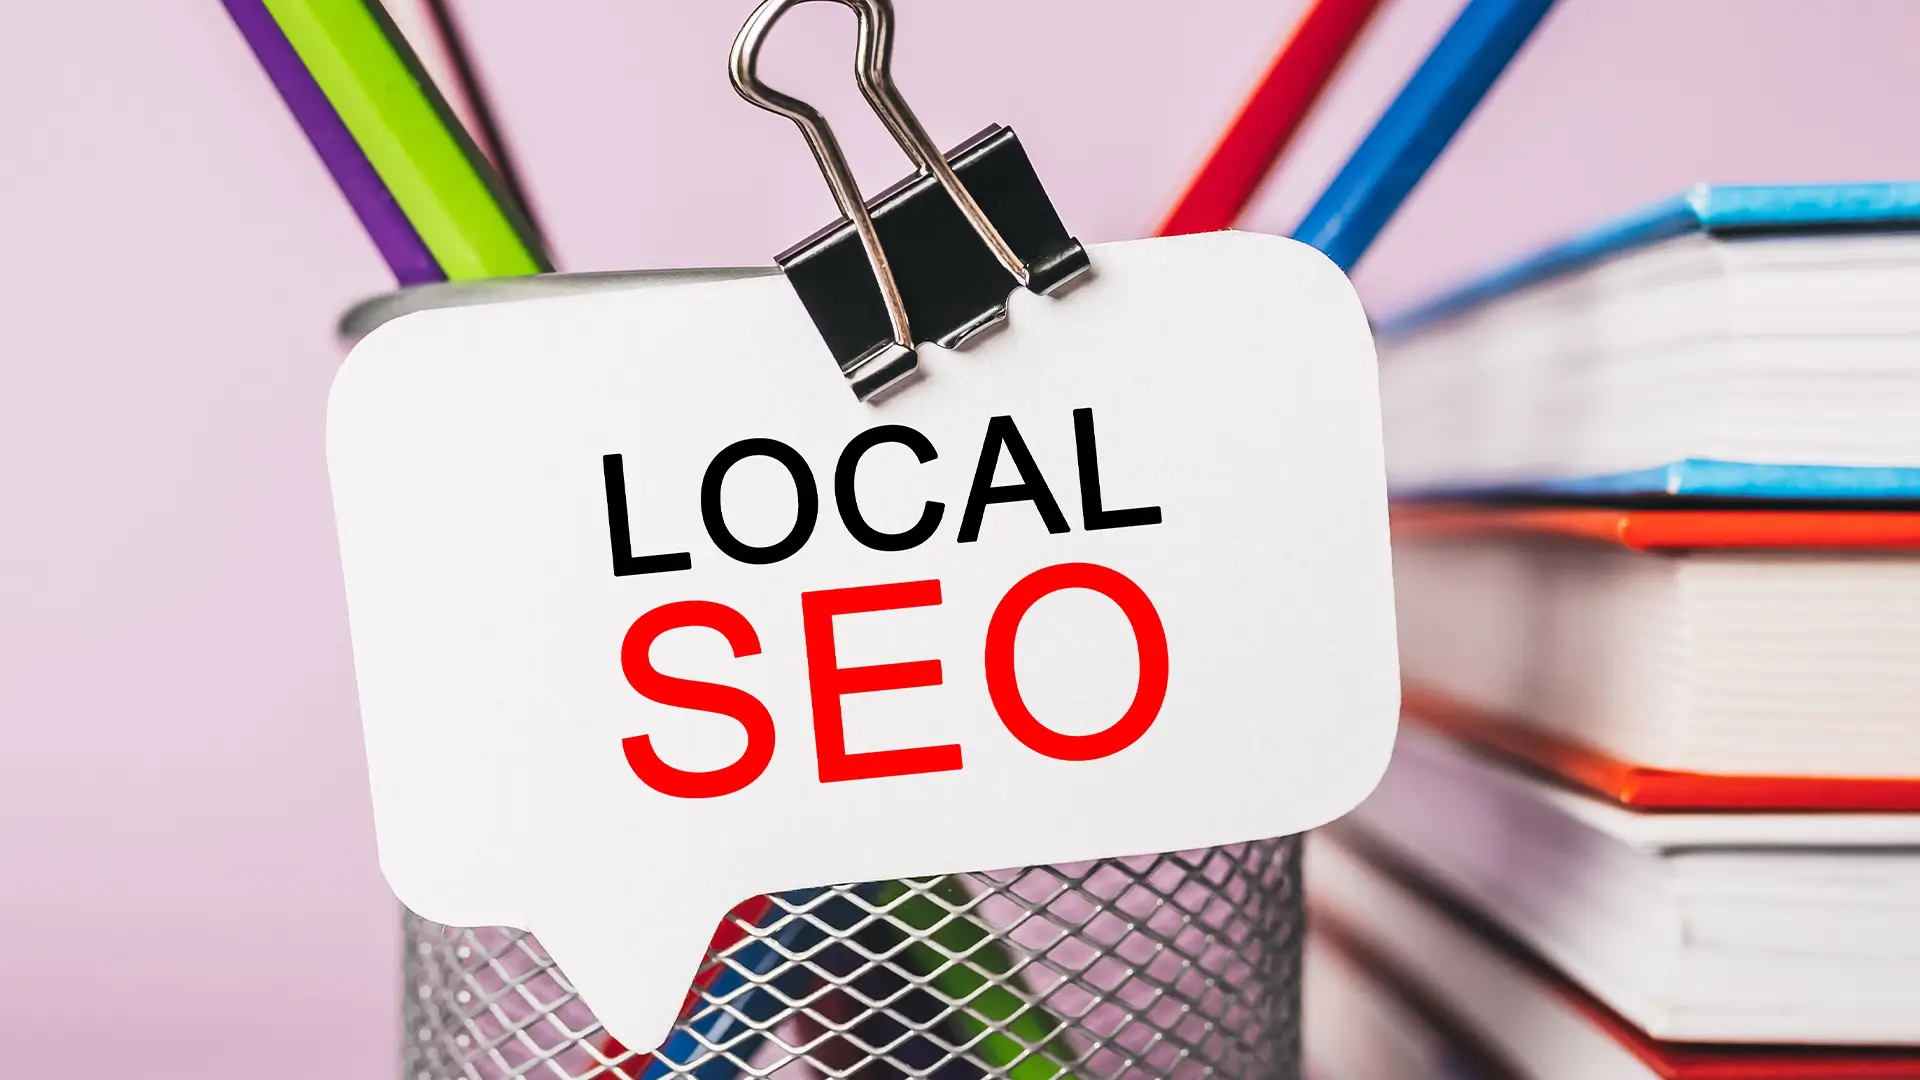 How to Use Google My Business to Boost Local SEO